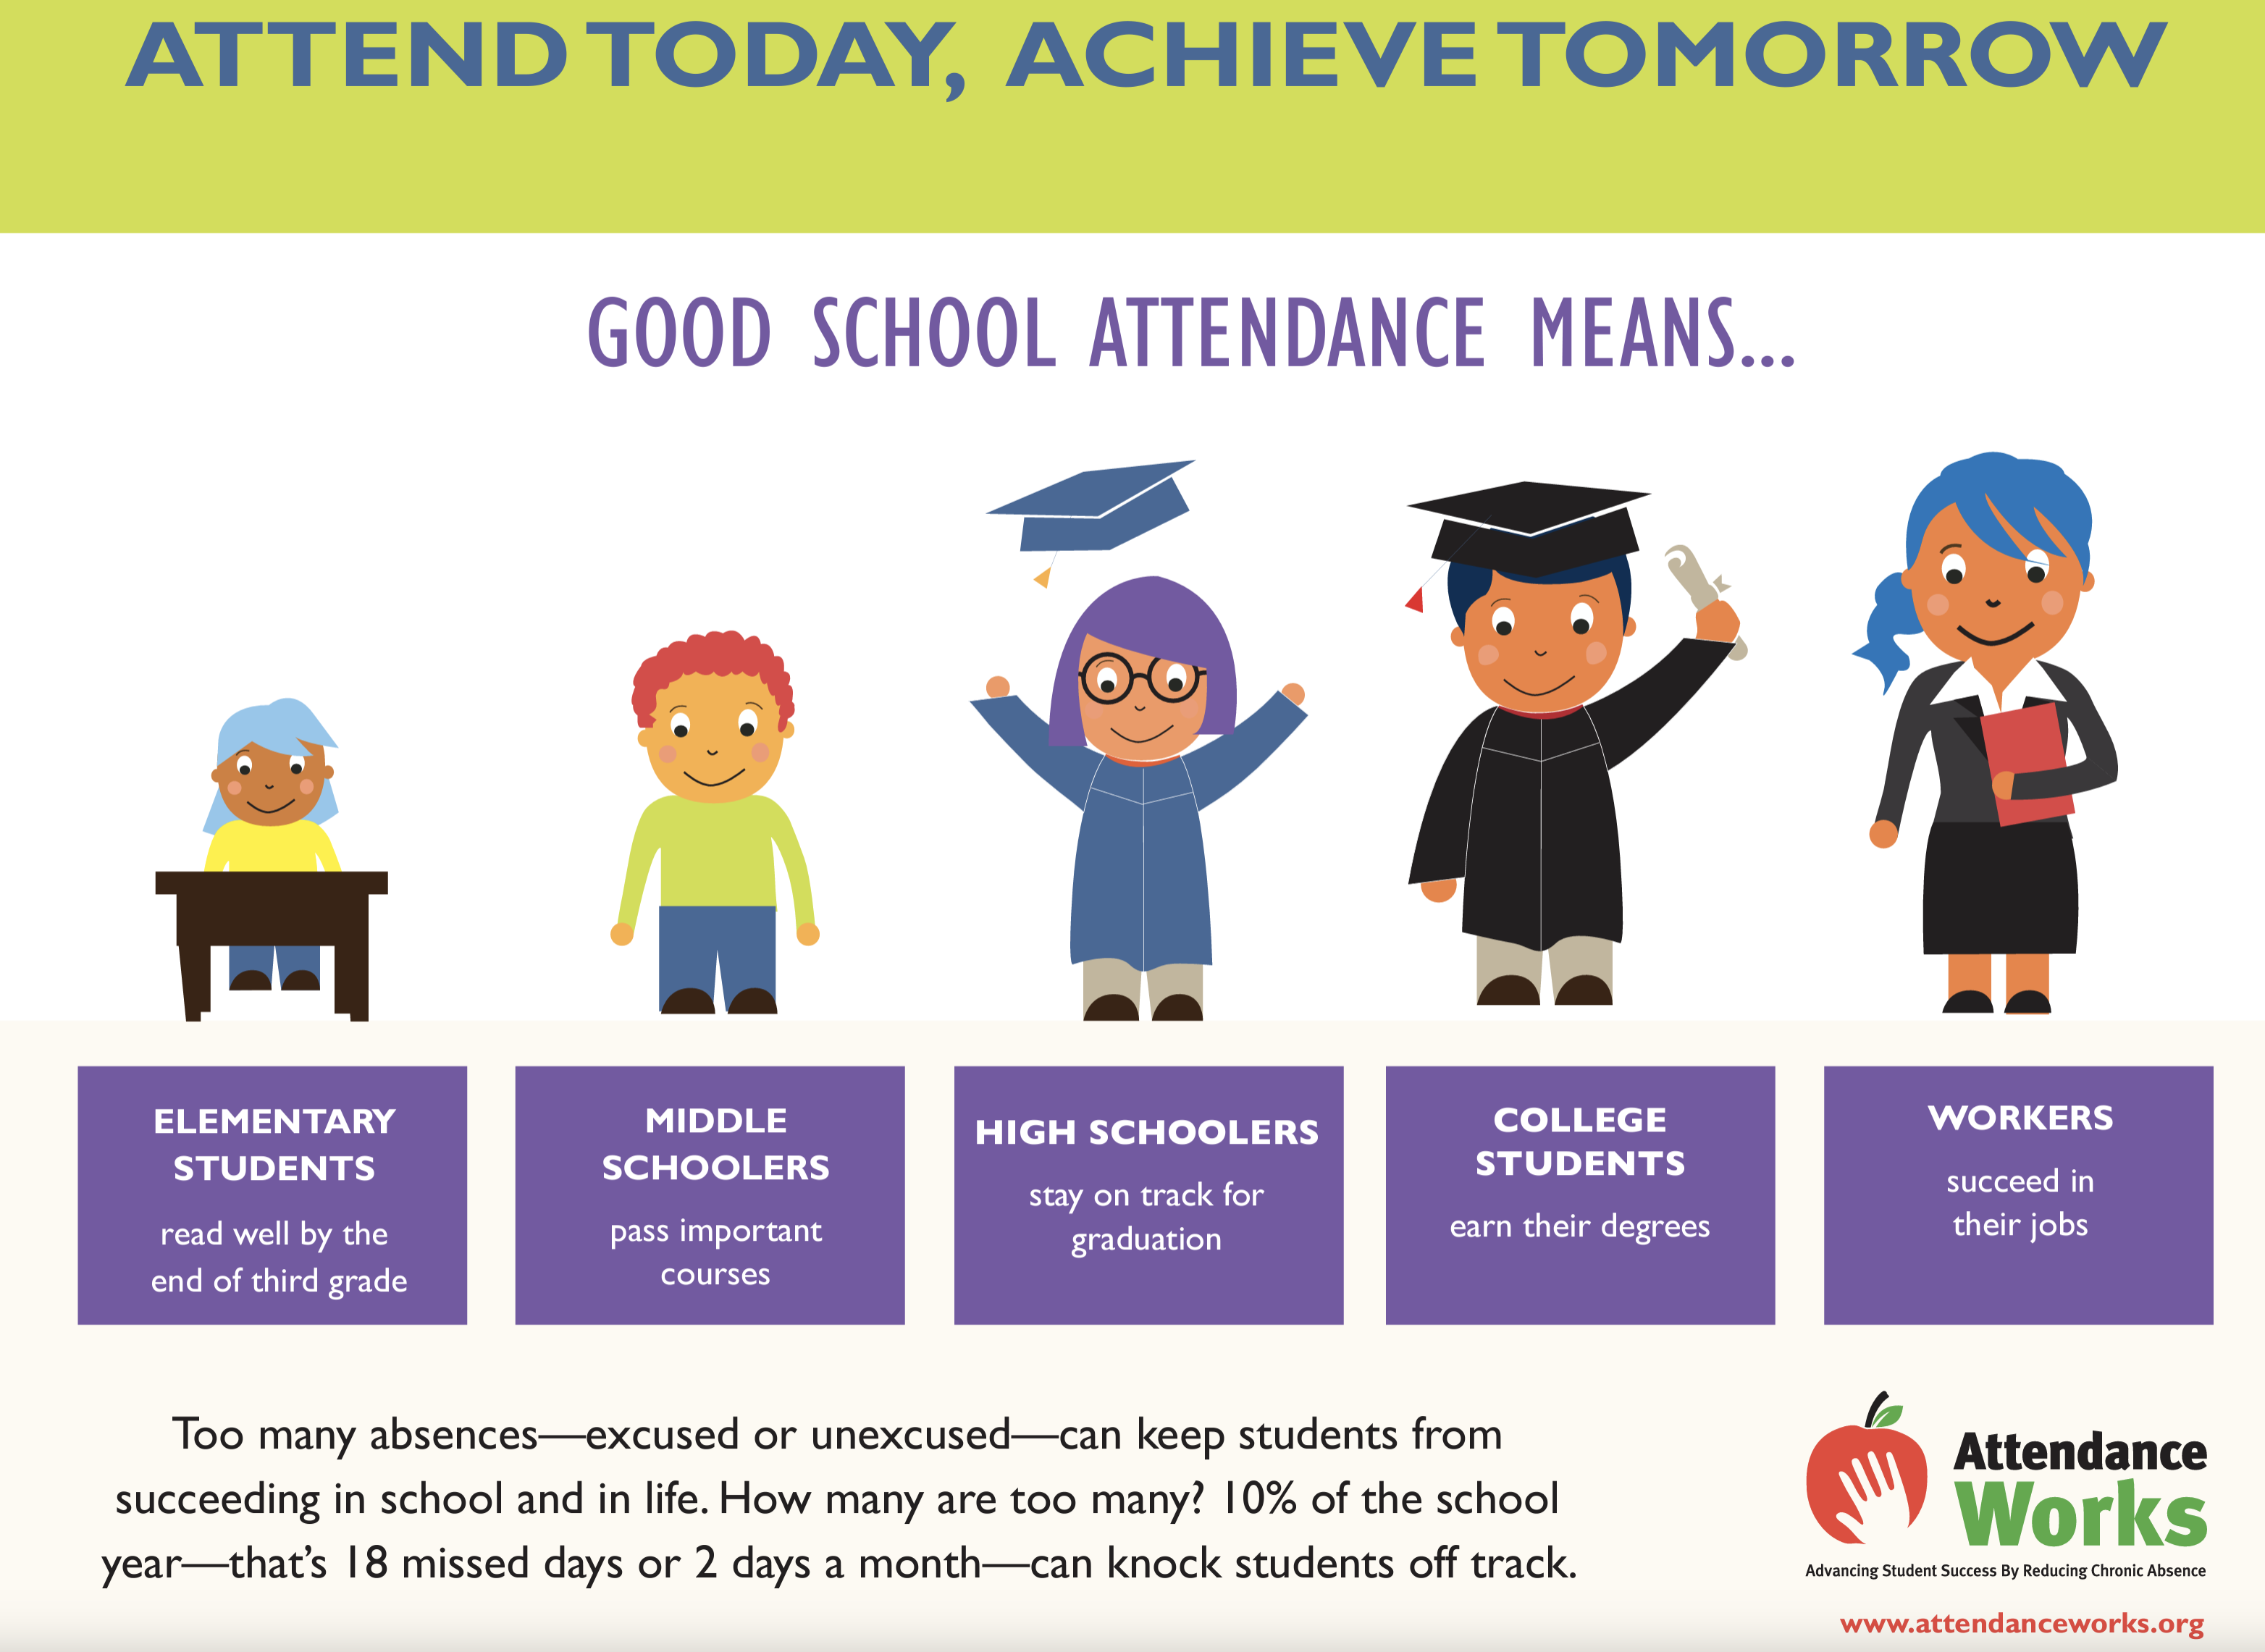 Infographic with text ELEMENTARY STUDENTS read well by the end of third grade MIDDLE SCHOOLERS pass important courses HIGH SCHOOLERS stay on track for graduation COLLEGE STUDENTS earn their degrees Too many absences—excused or unexcused—can keep students from succeeding in school and in life. How many are too many? 10% of the school year—that’s 18 missed days or 2 days a month—can knock students off track.     WORKERS succeed in their jobs www.attendanceworks.org